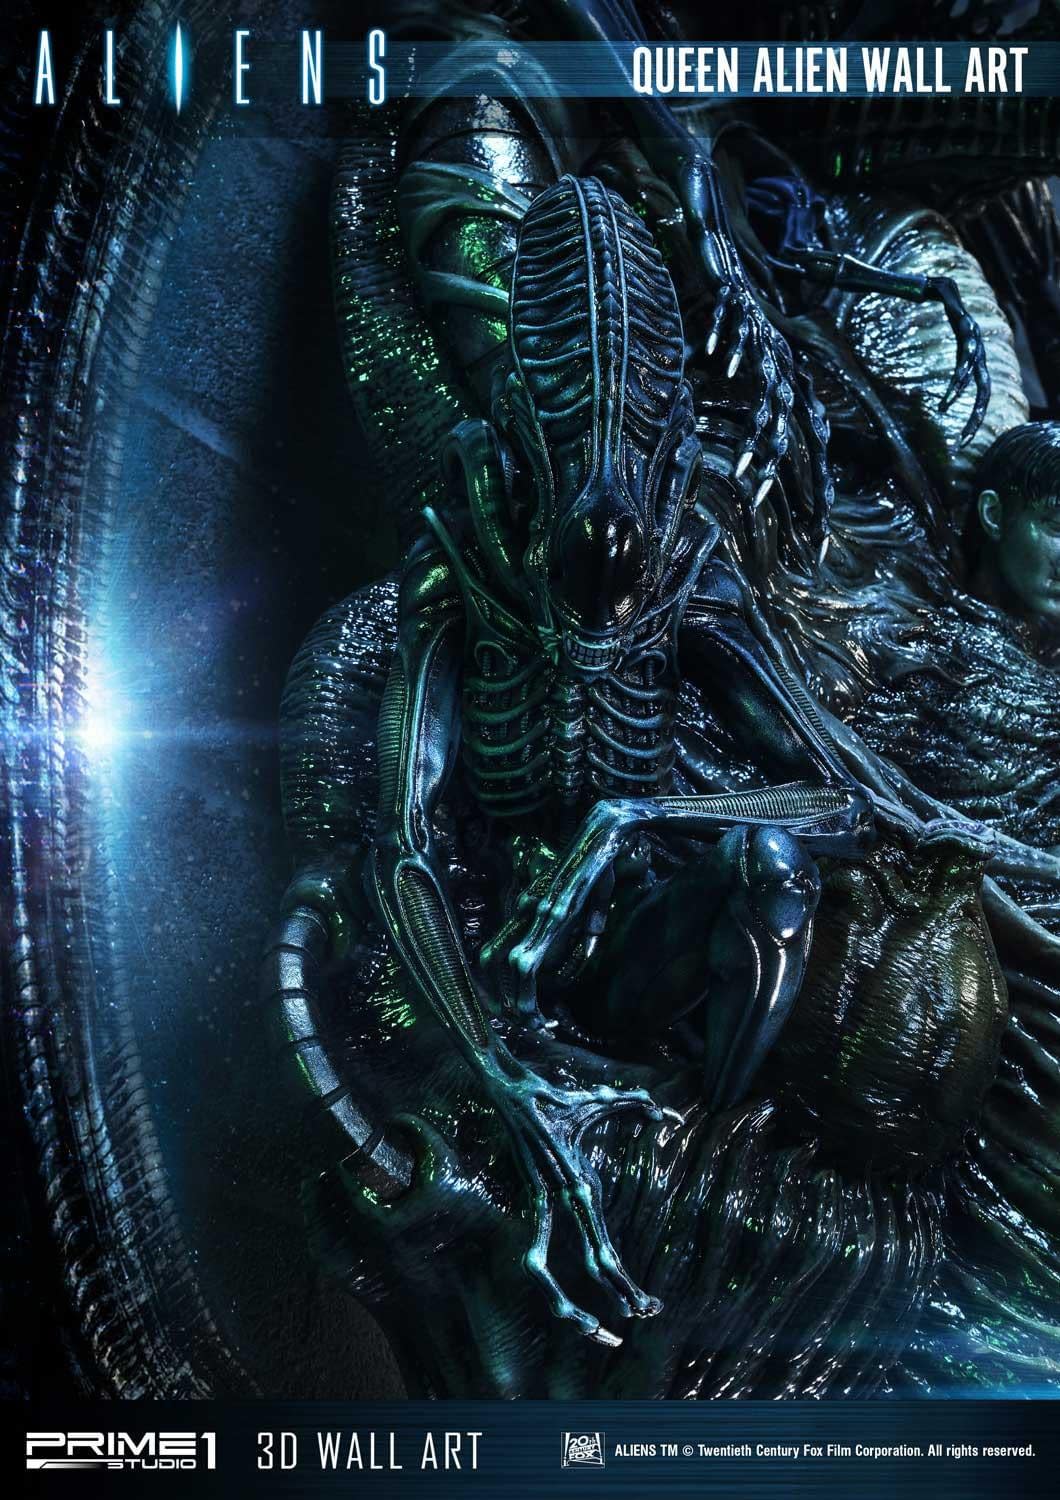 Alien Queen Wall Art Unveiled by Prime 1 Studio Bursts with Detail